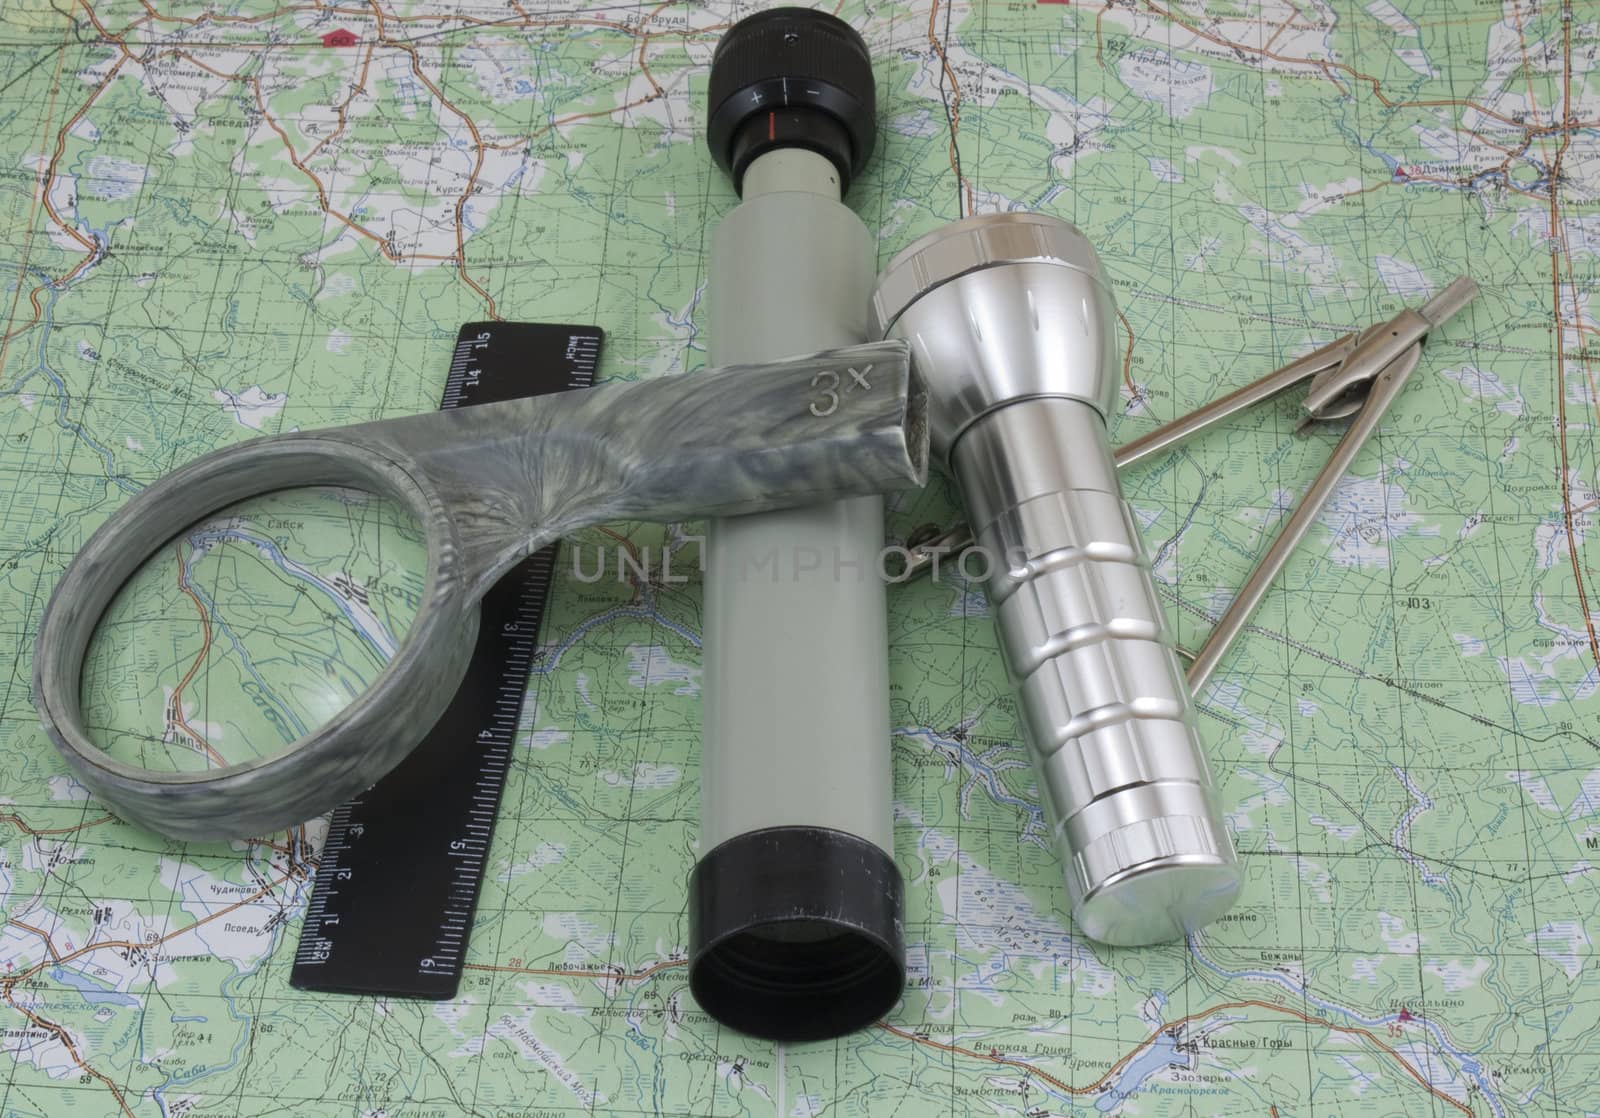 Preparation for travel. Telescope, card, compasses, small lamp.